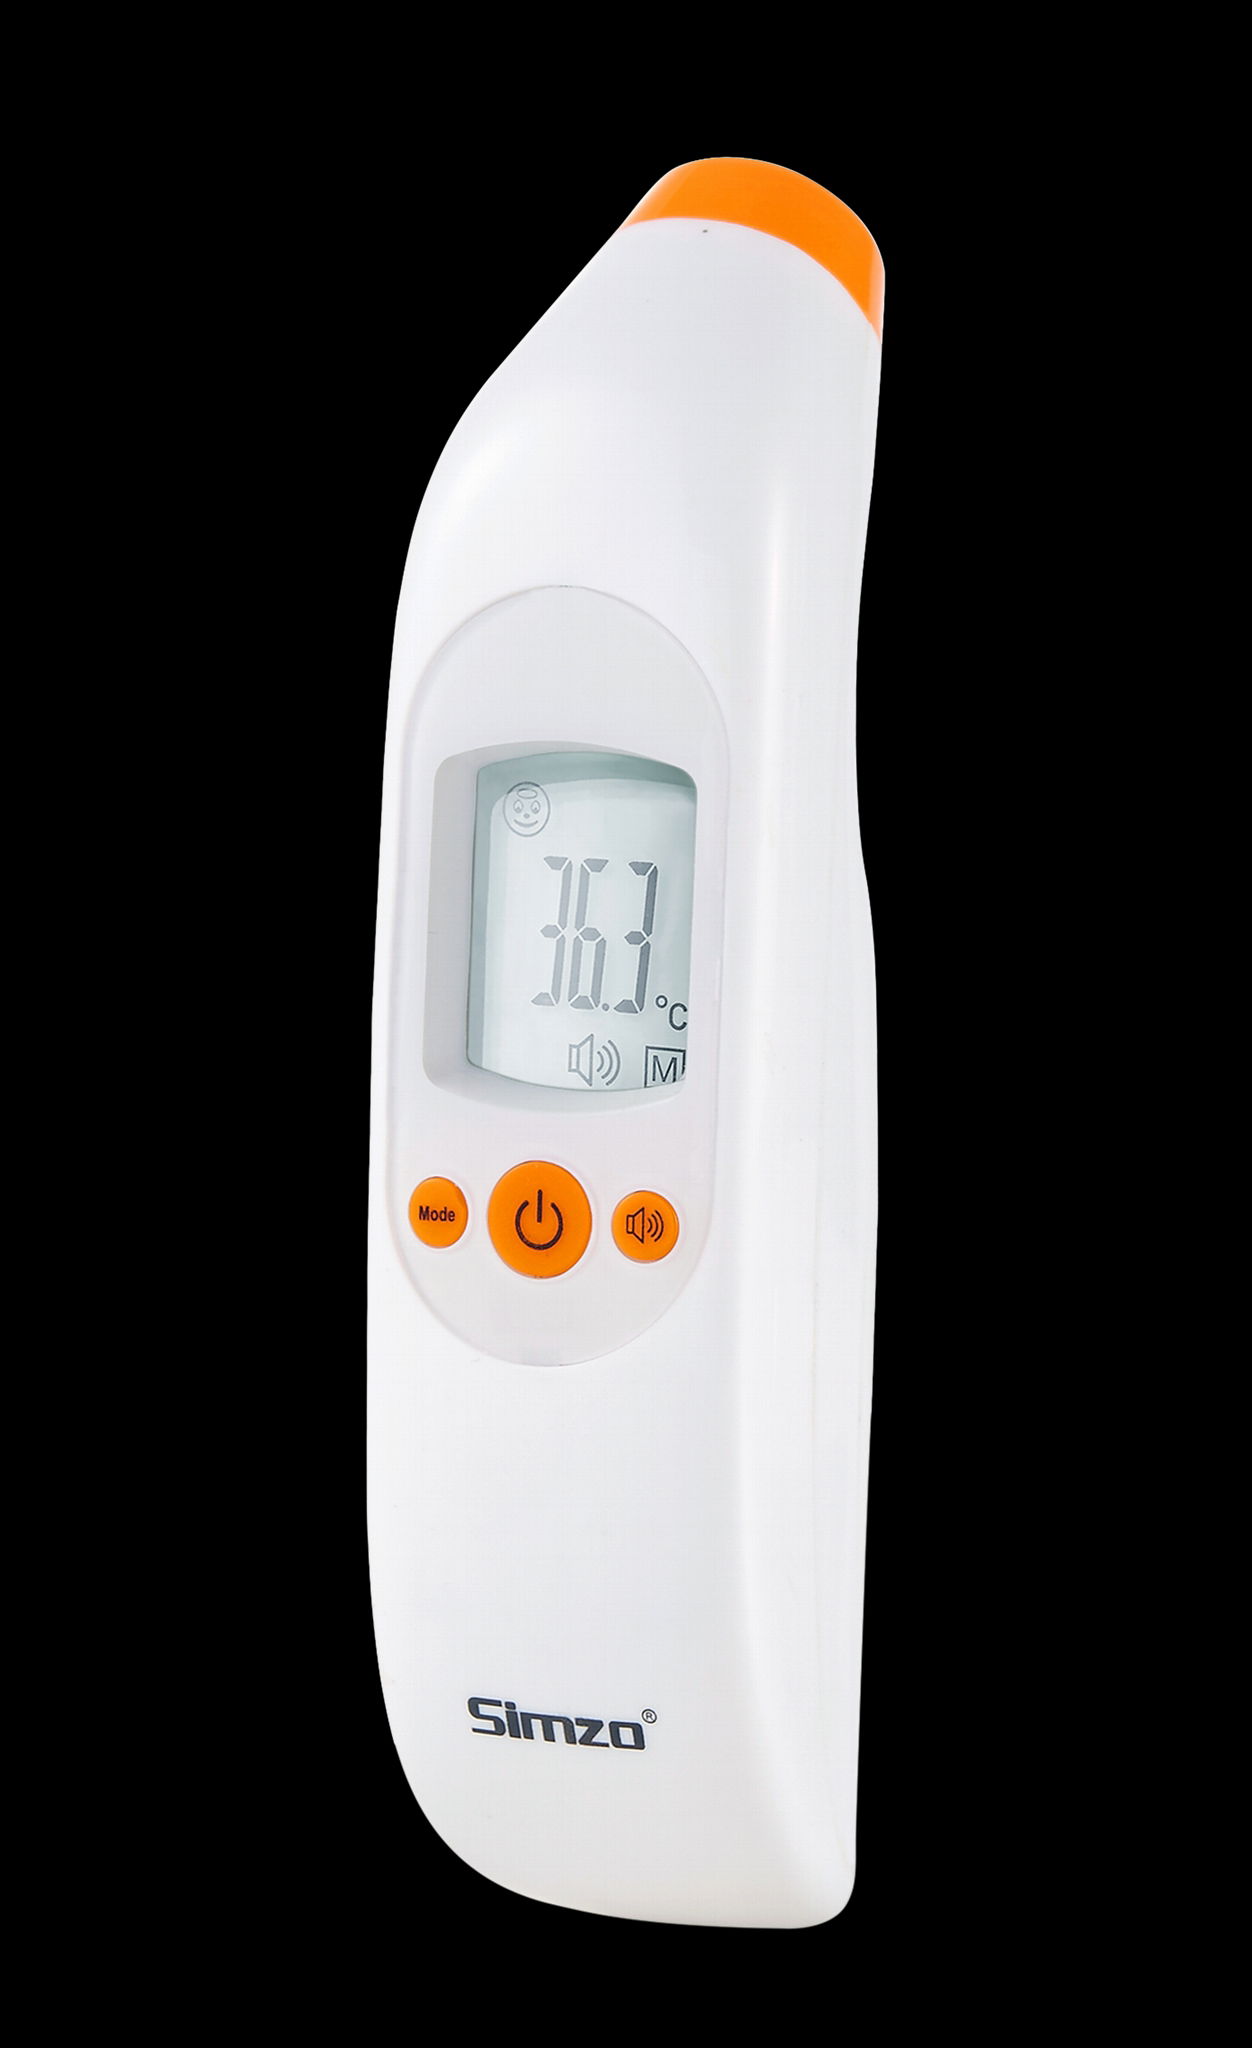 Infrared forehead thermometer for baby and adult